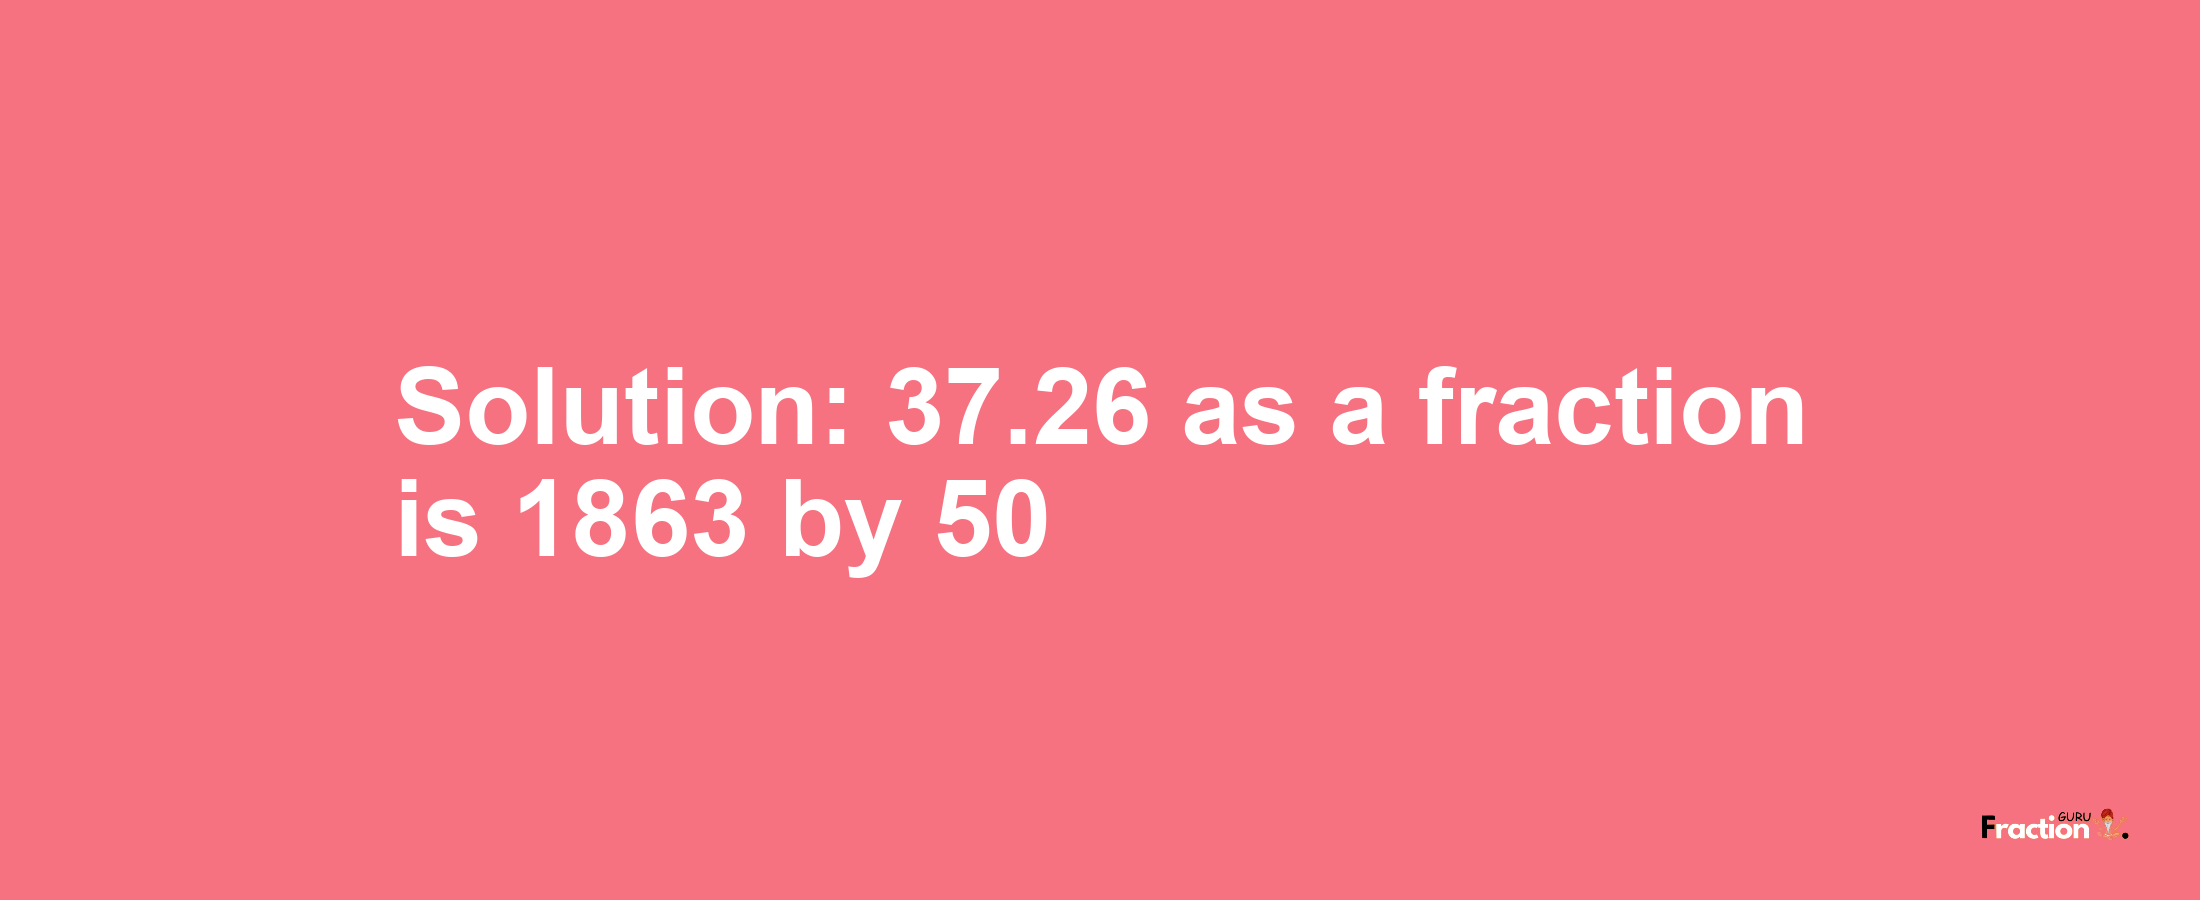 Solution:37.26 as a fraction is 1863/50